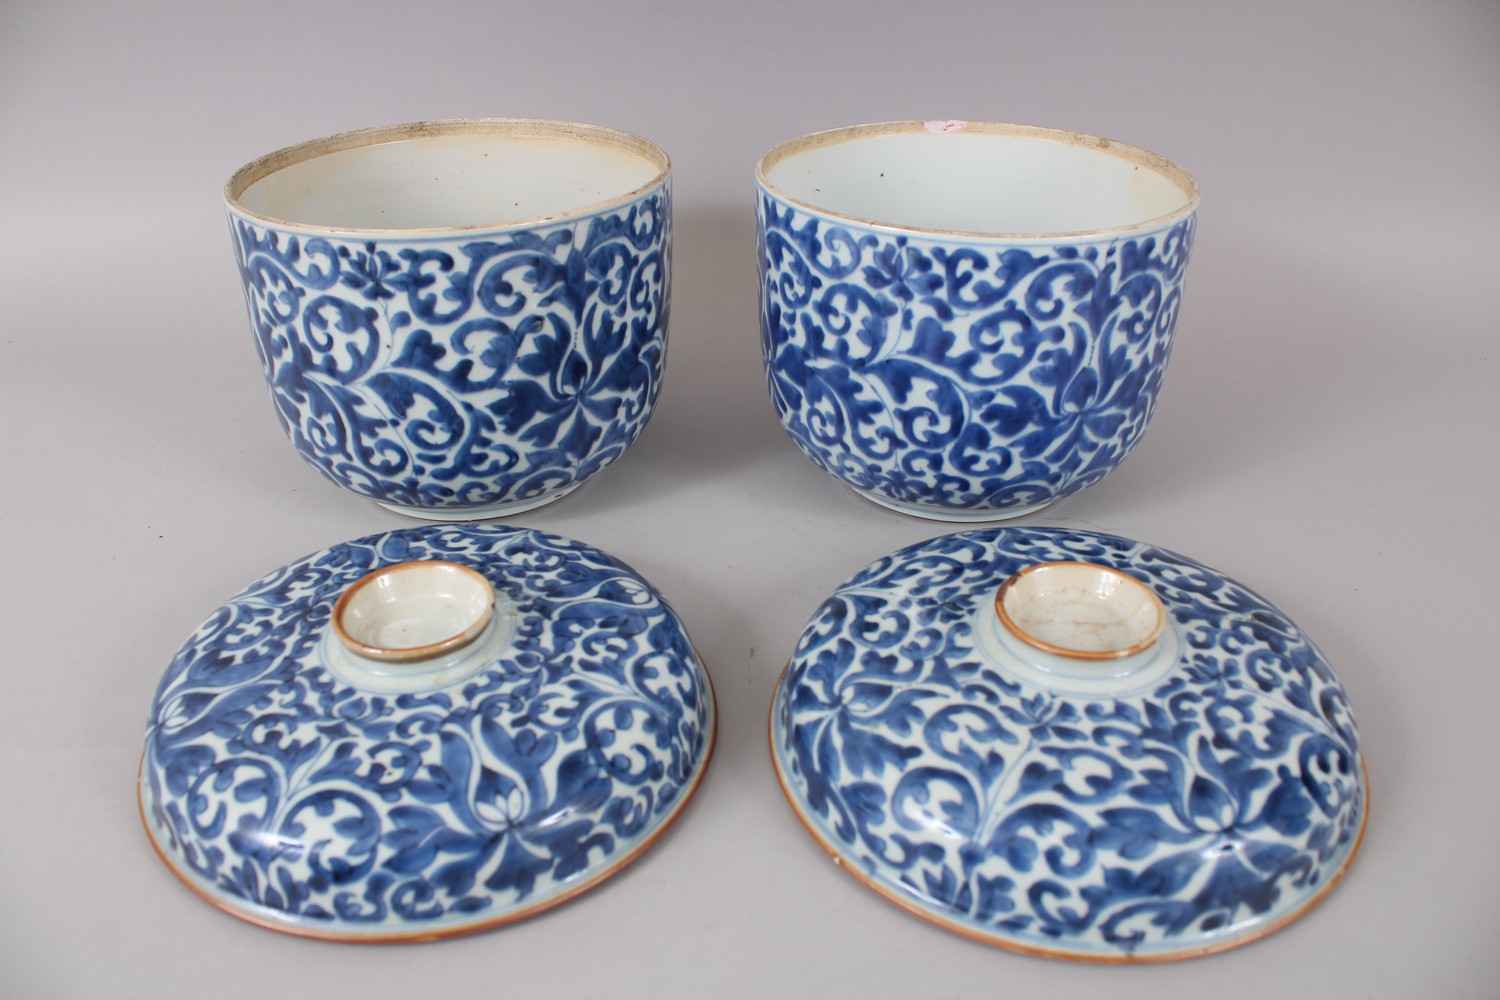 A GOOD PAIR OF QIANLONG CHINESE BLUE AND WHITE PORCELAIN BOWLS & COVERS, the decoration of formal - Image 2 of 3